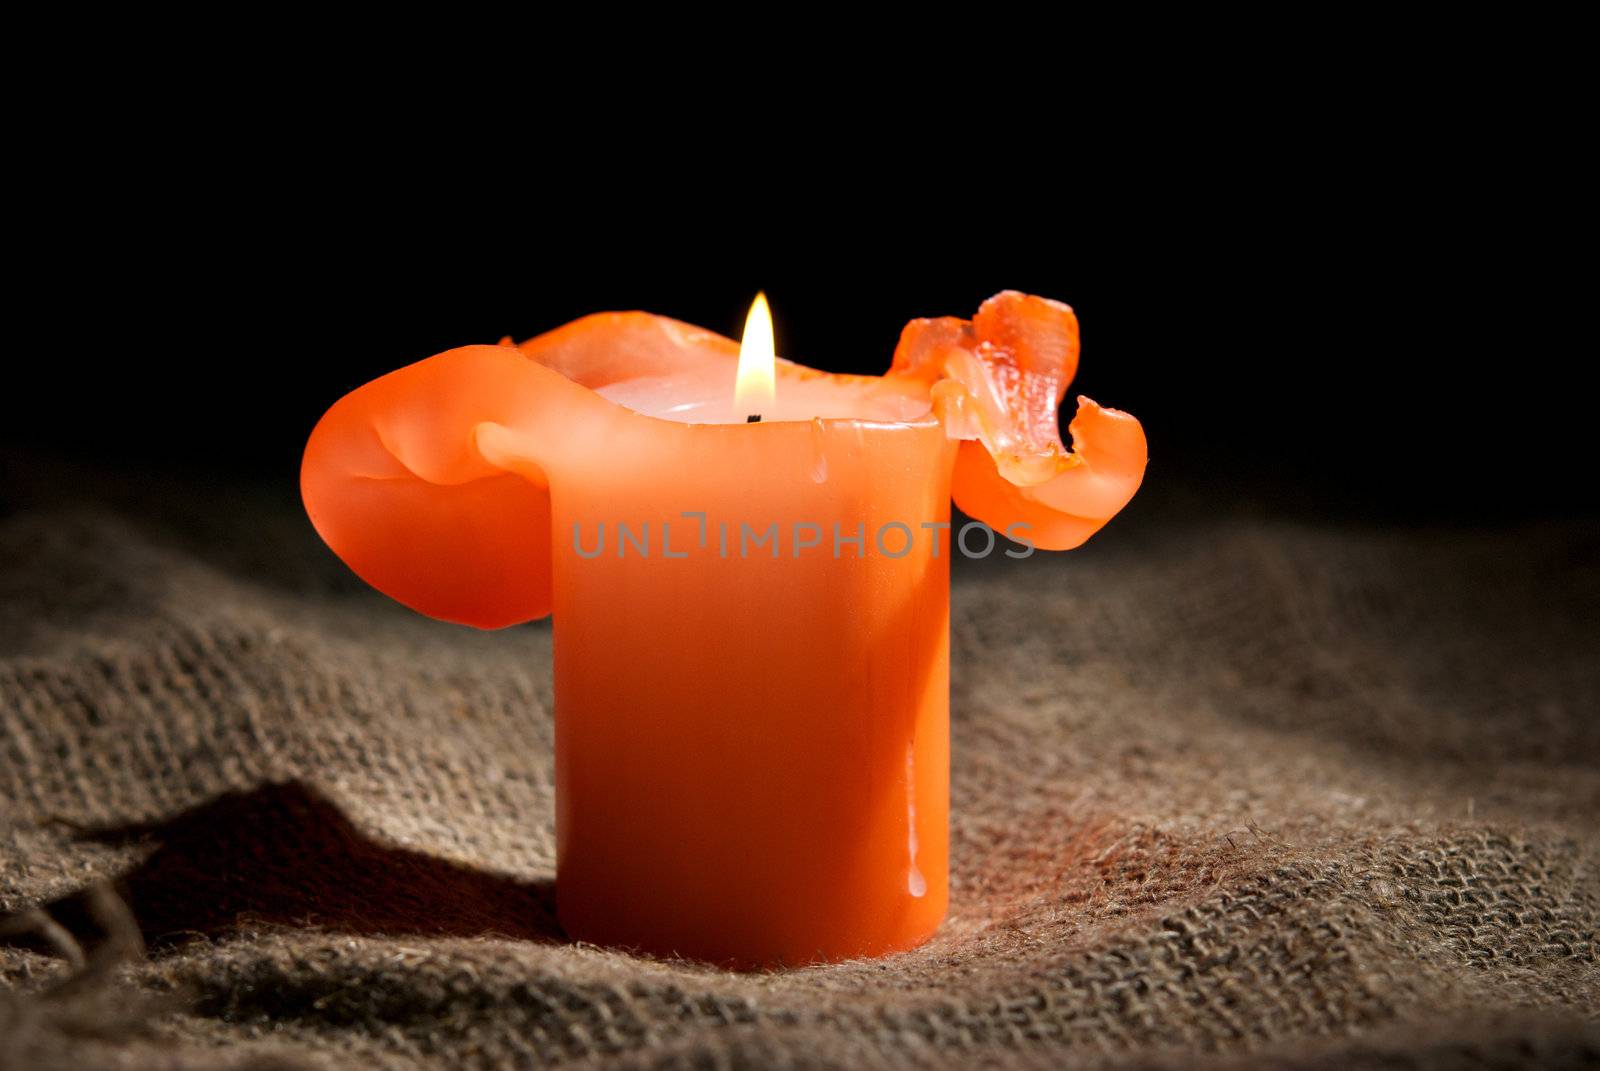 Closeup of a burning candle on the dark background